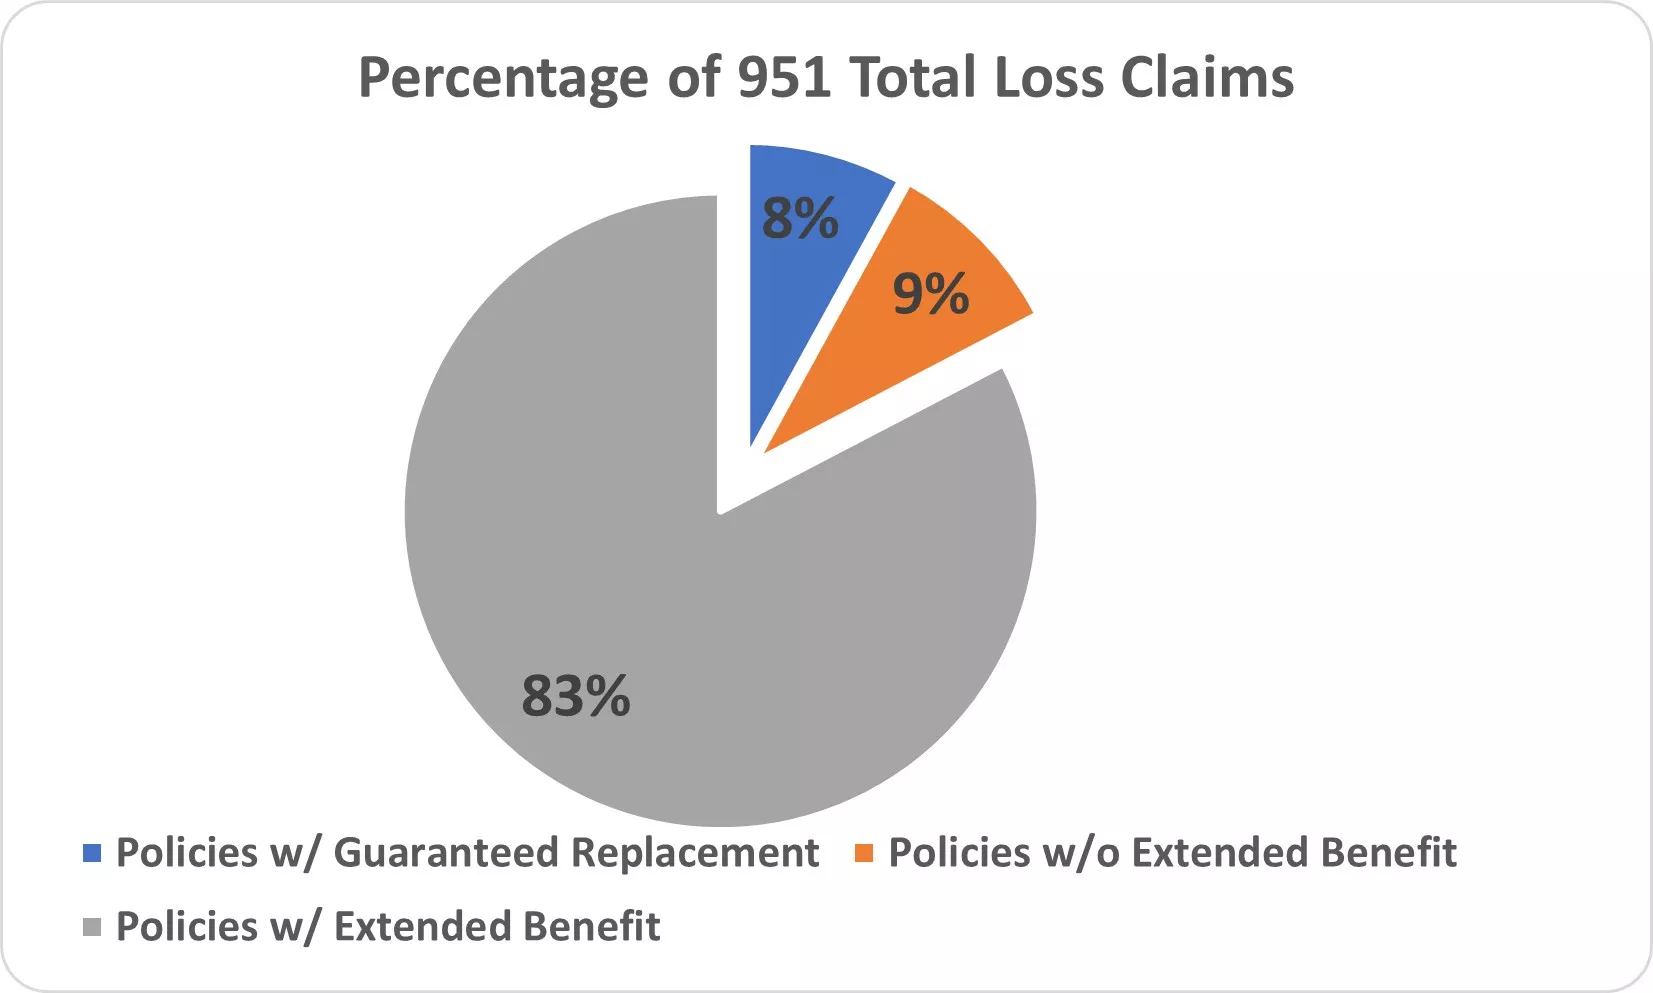 Breakdown by policy of 951 Marshall Fire Total Loss Claims - 83% included extended benefit coverage; 9% did not have extended benefit coverage, and 8% had full guaranteed replacement coverage